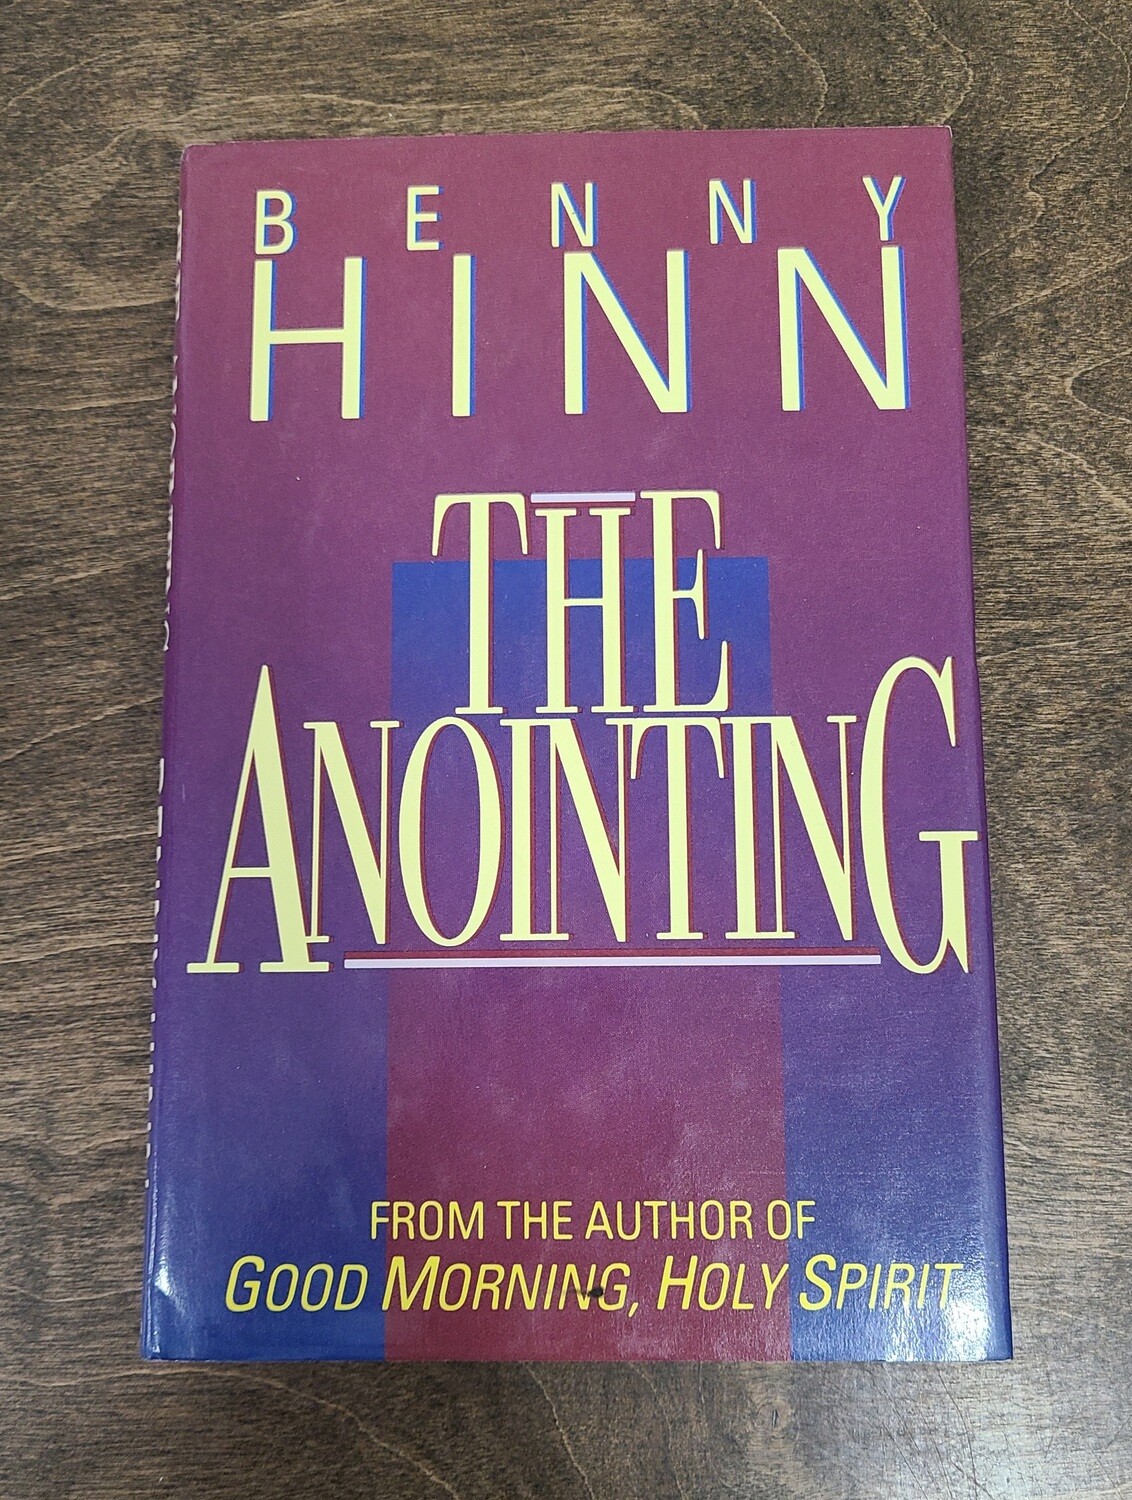 The Anointing by Benny Hinn